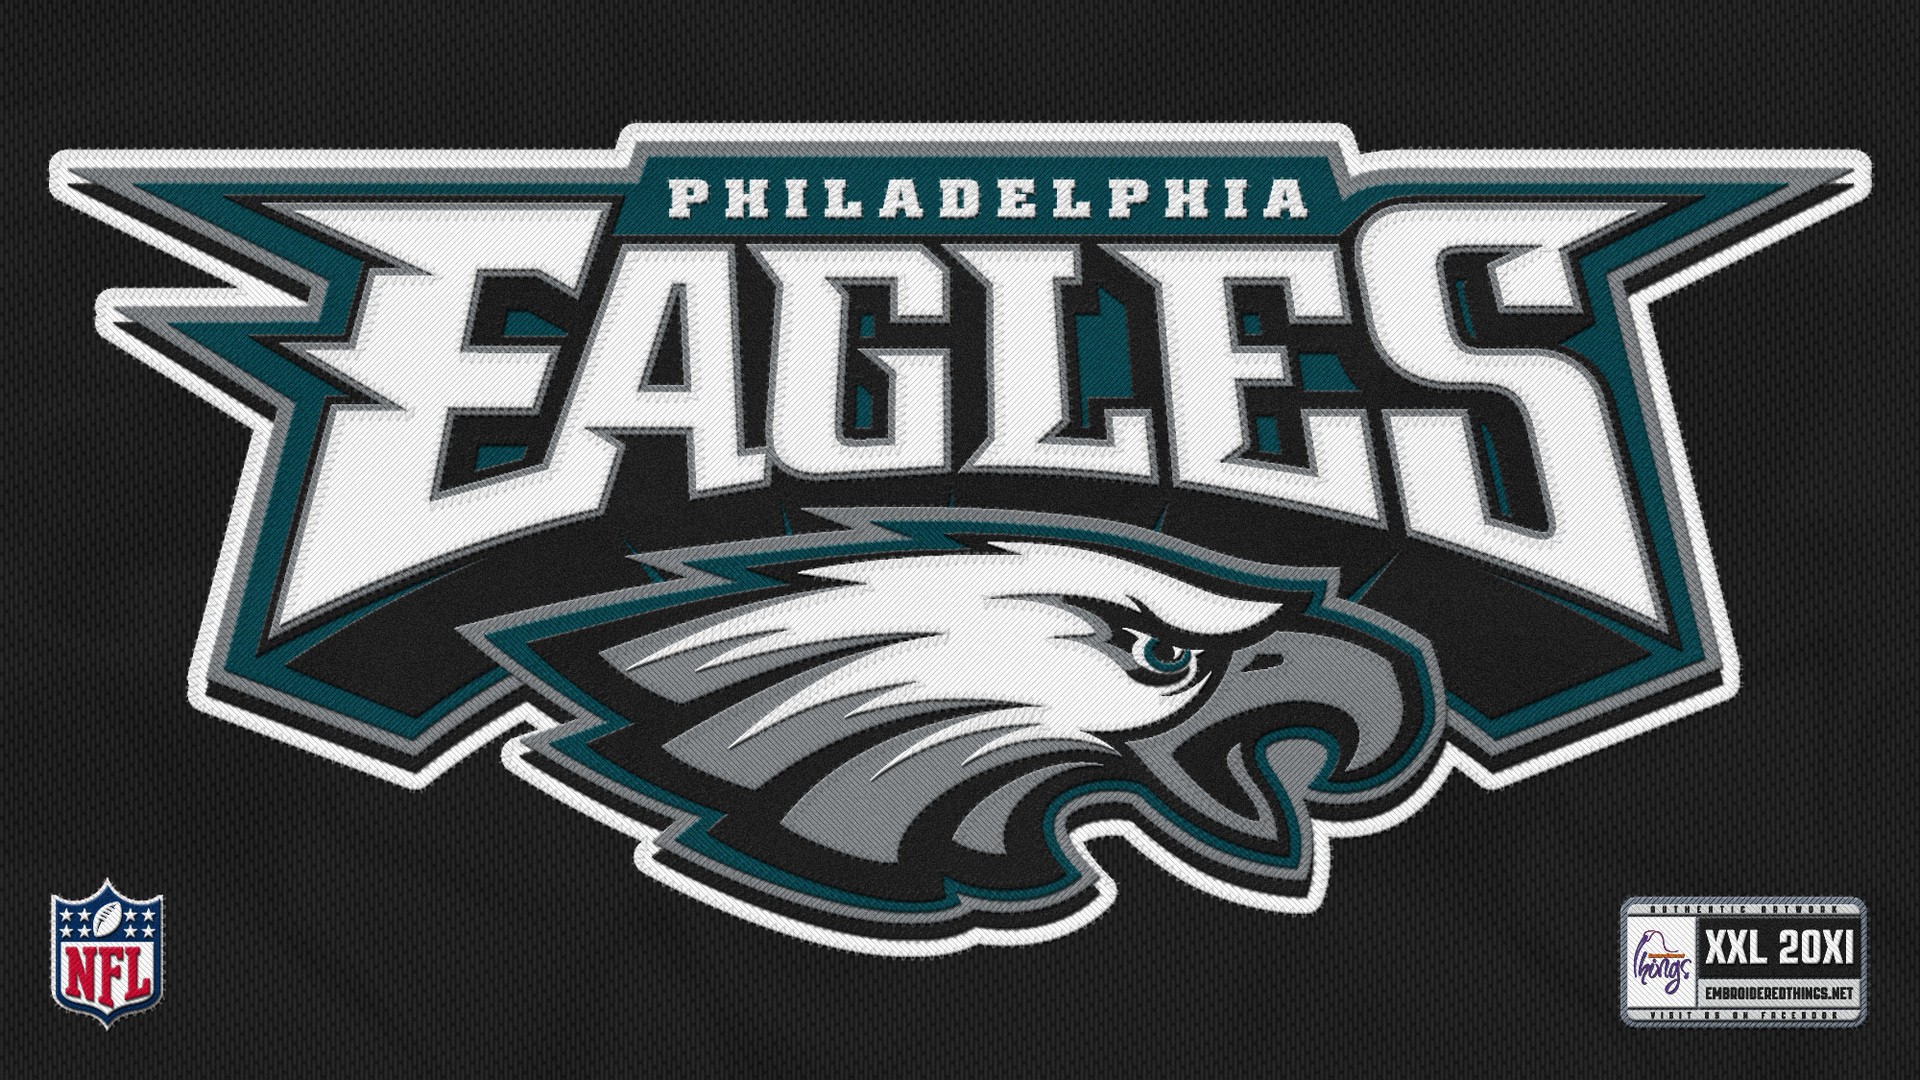 Eagles Wallpaper For Mac Backgrounds With Resolution 1920X1080 pixel. You can make this wallpaper for your Mac or Windows Desktop Background, iPhone, Android or Tablet and another Smartphone device for free